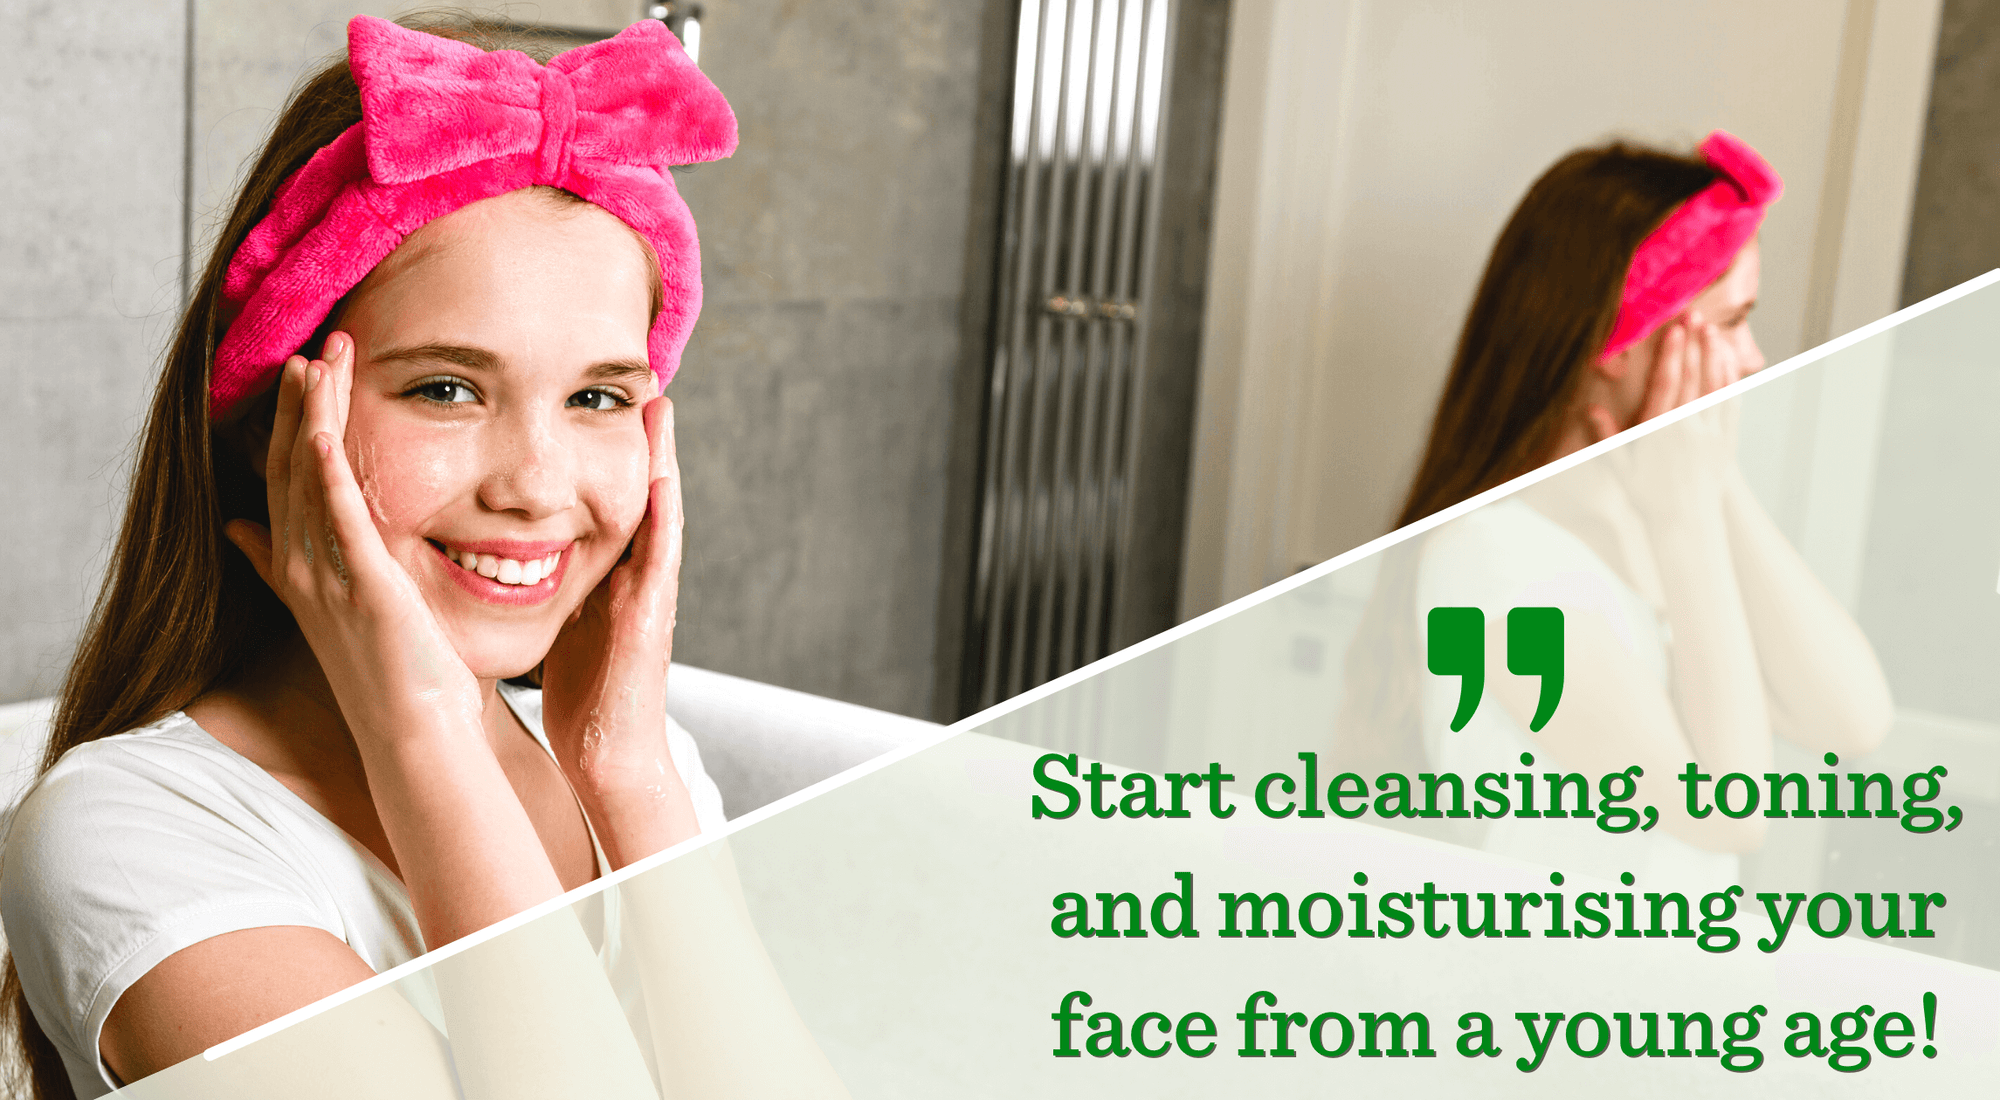 Why it's better to start cleansing your face from a young age?